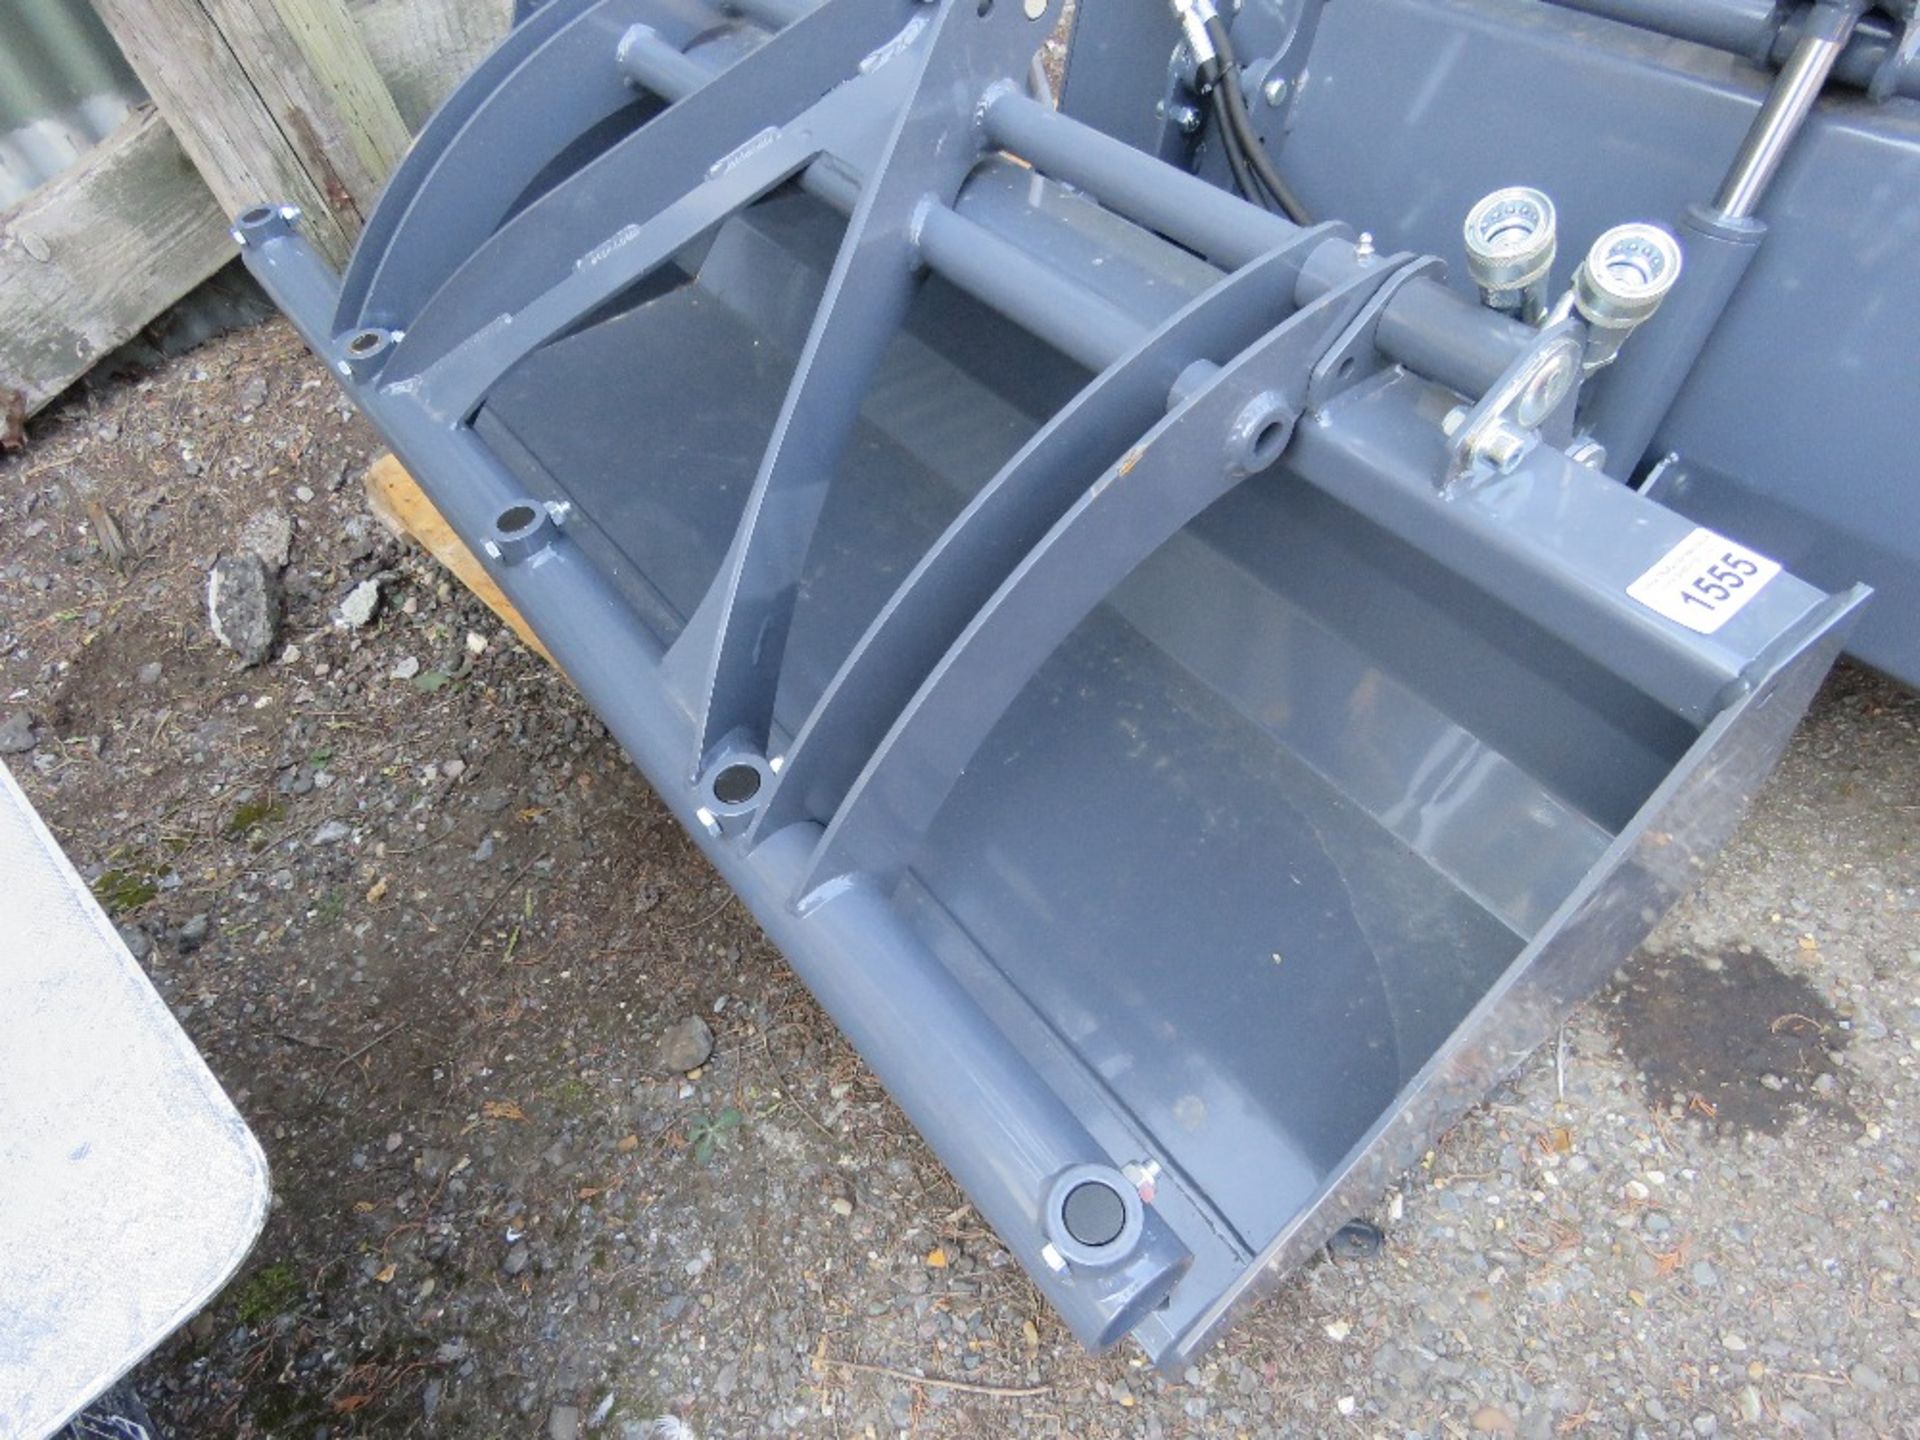 UNUSED MUCK GRAB LADER BUCKET TO SUIT COMPACT TRACTOR OR SKID STEER LOADER ETC. 4FT WIDTH APPROX.